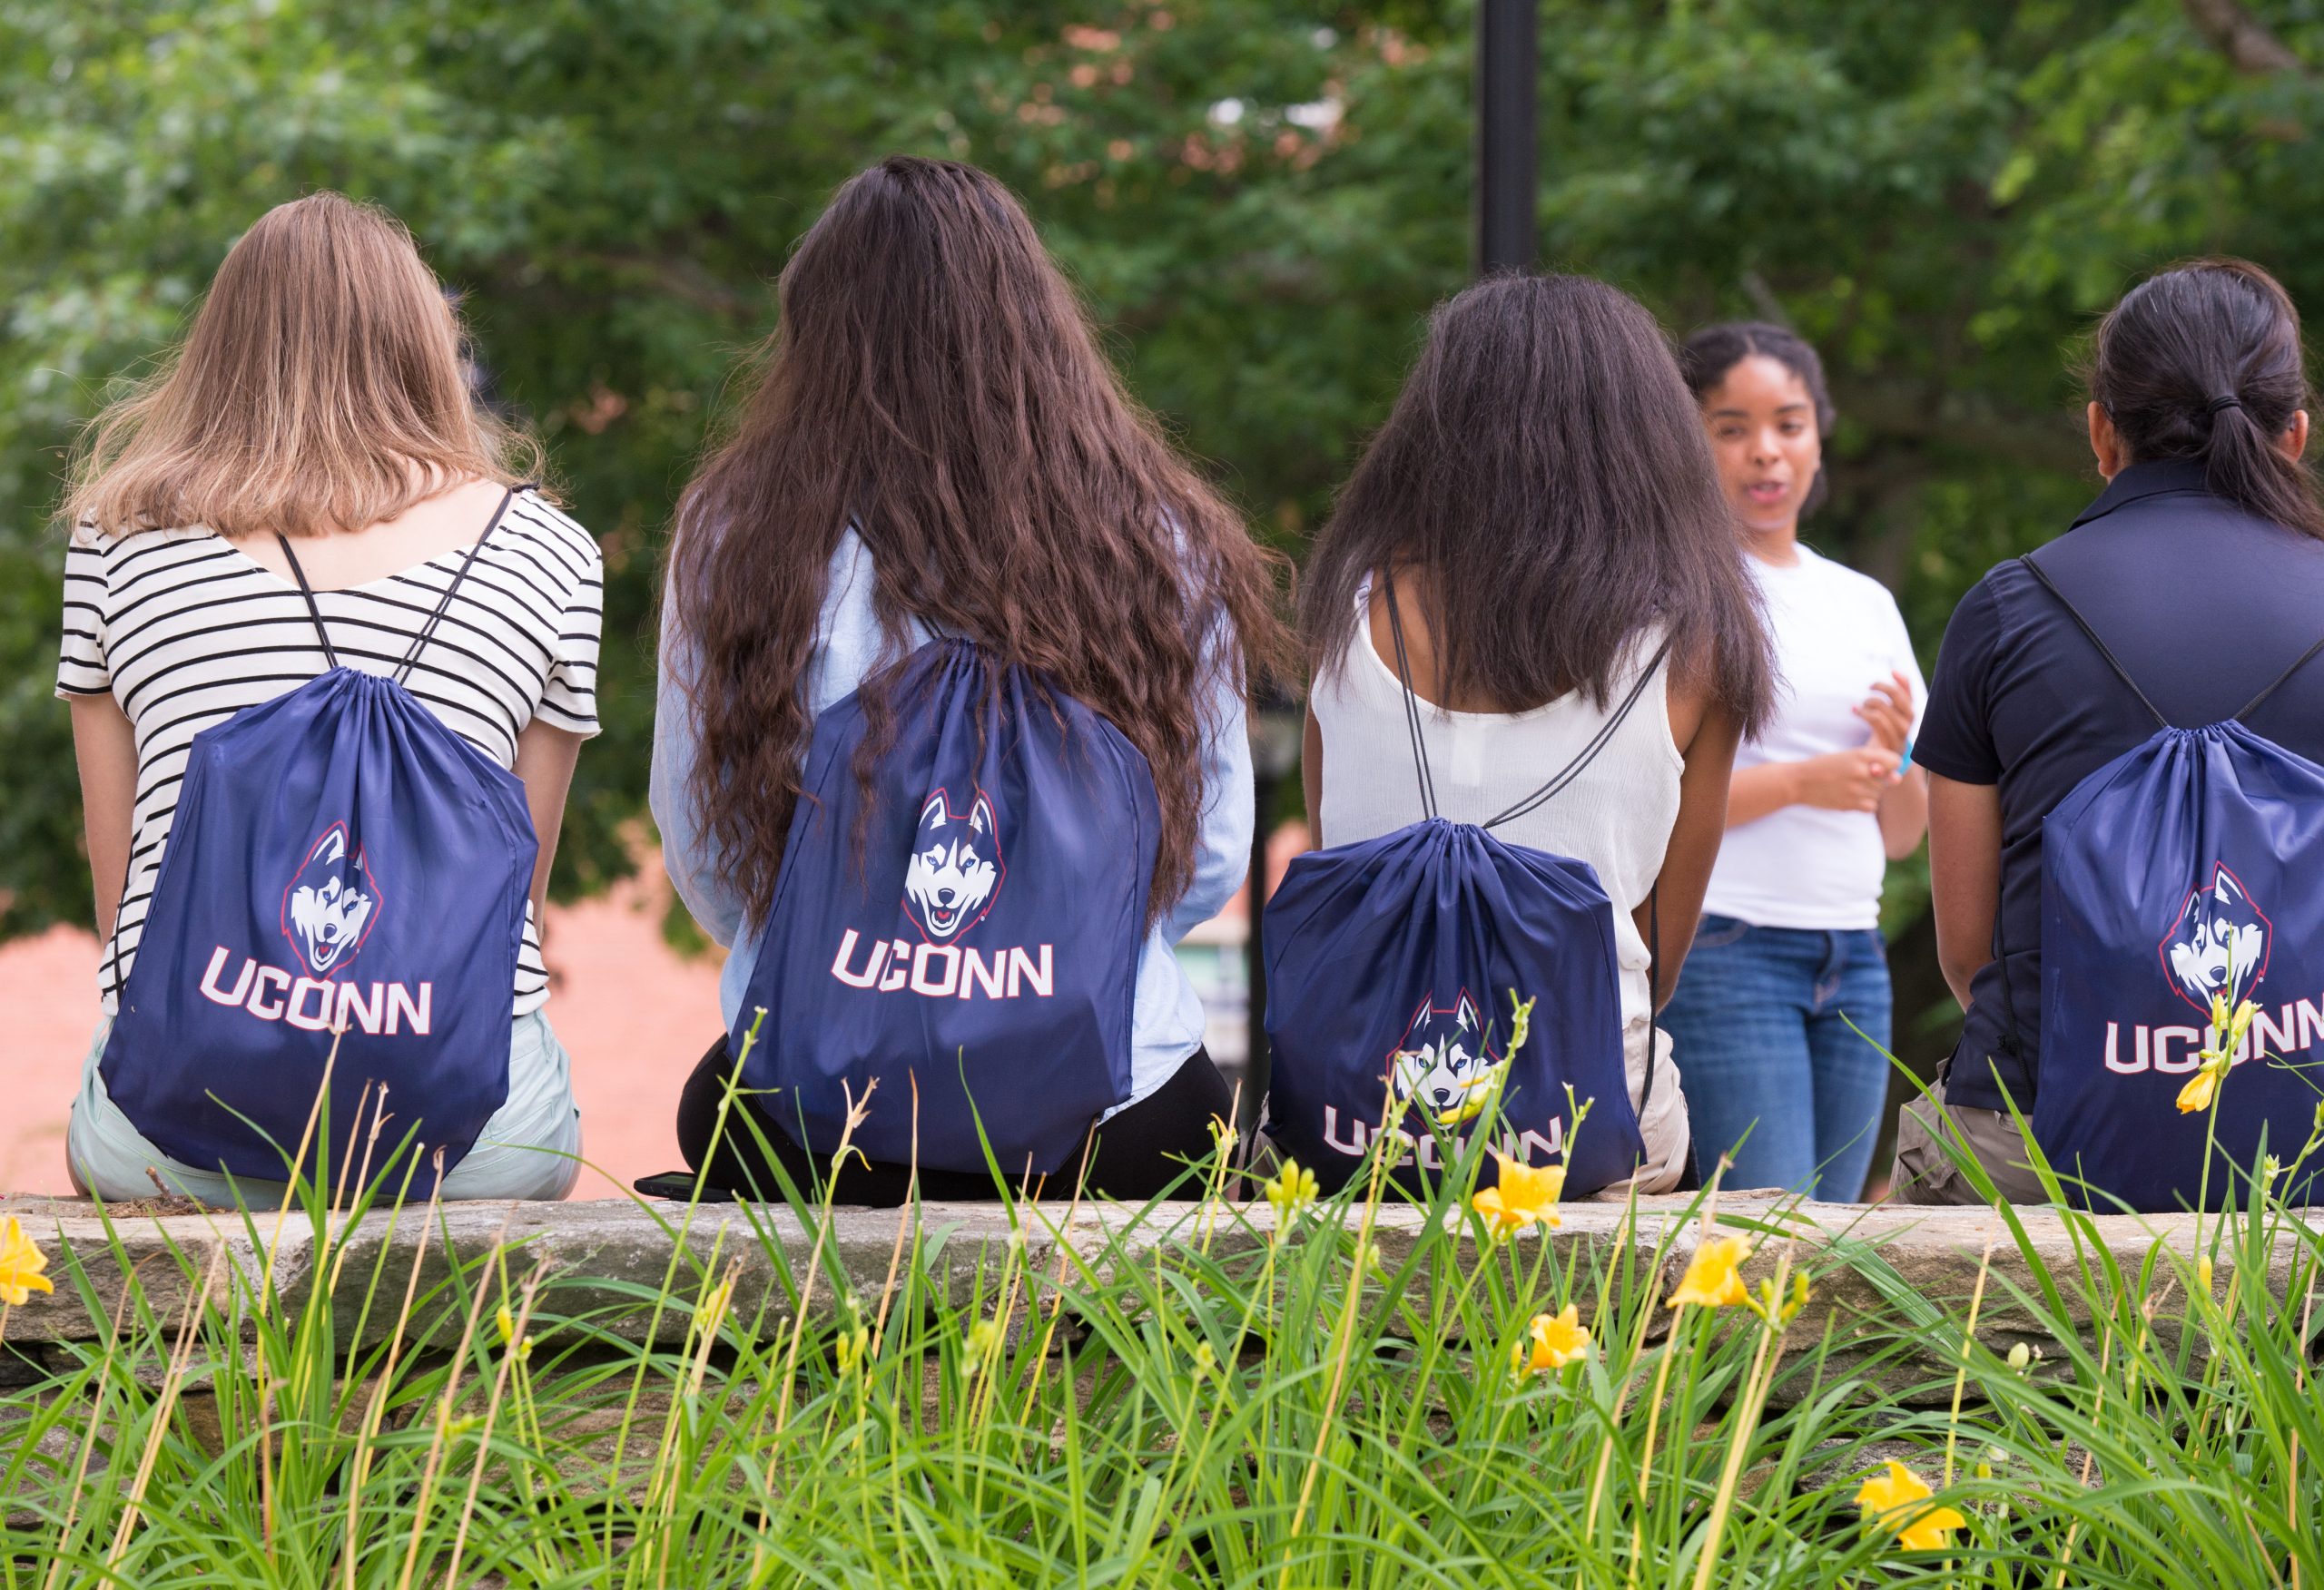 Uconn students wearing upon backpacks